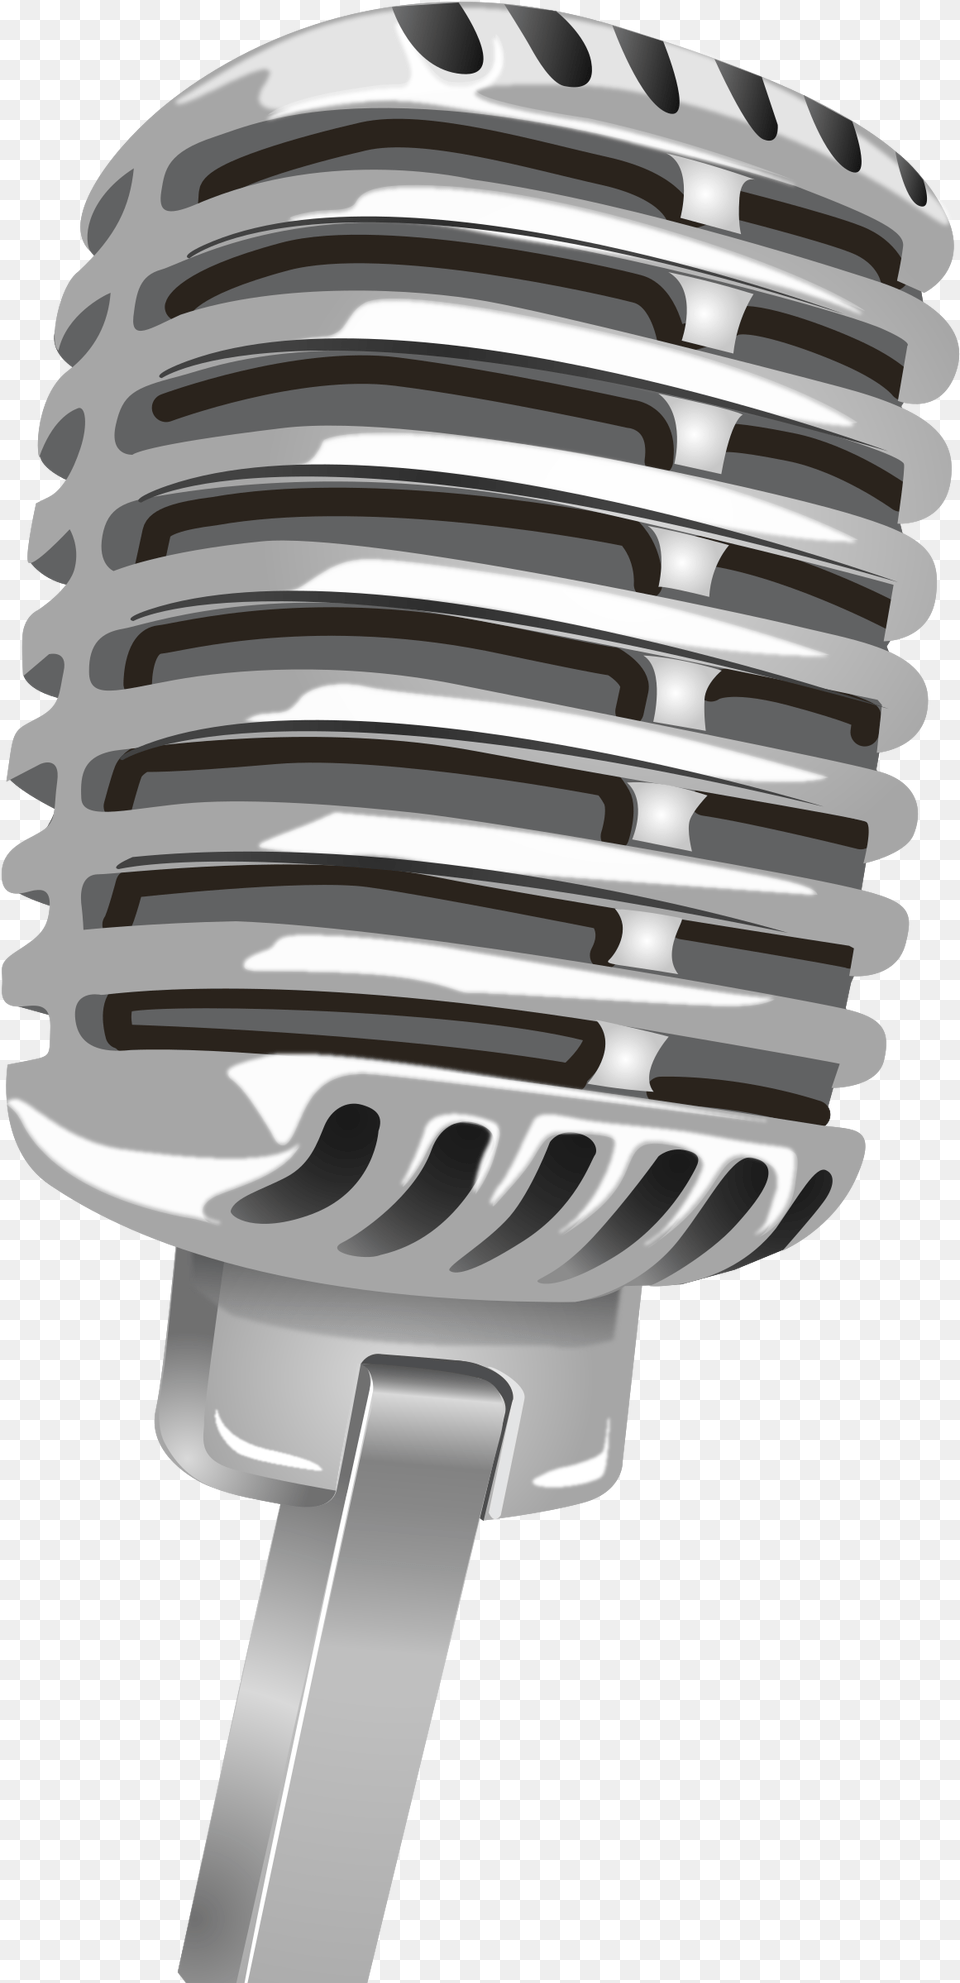 Free Retro Microphone With Transparent Background Retro Mic Vector, Electrical Device Png Image